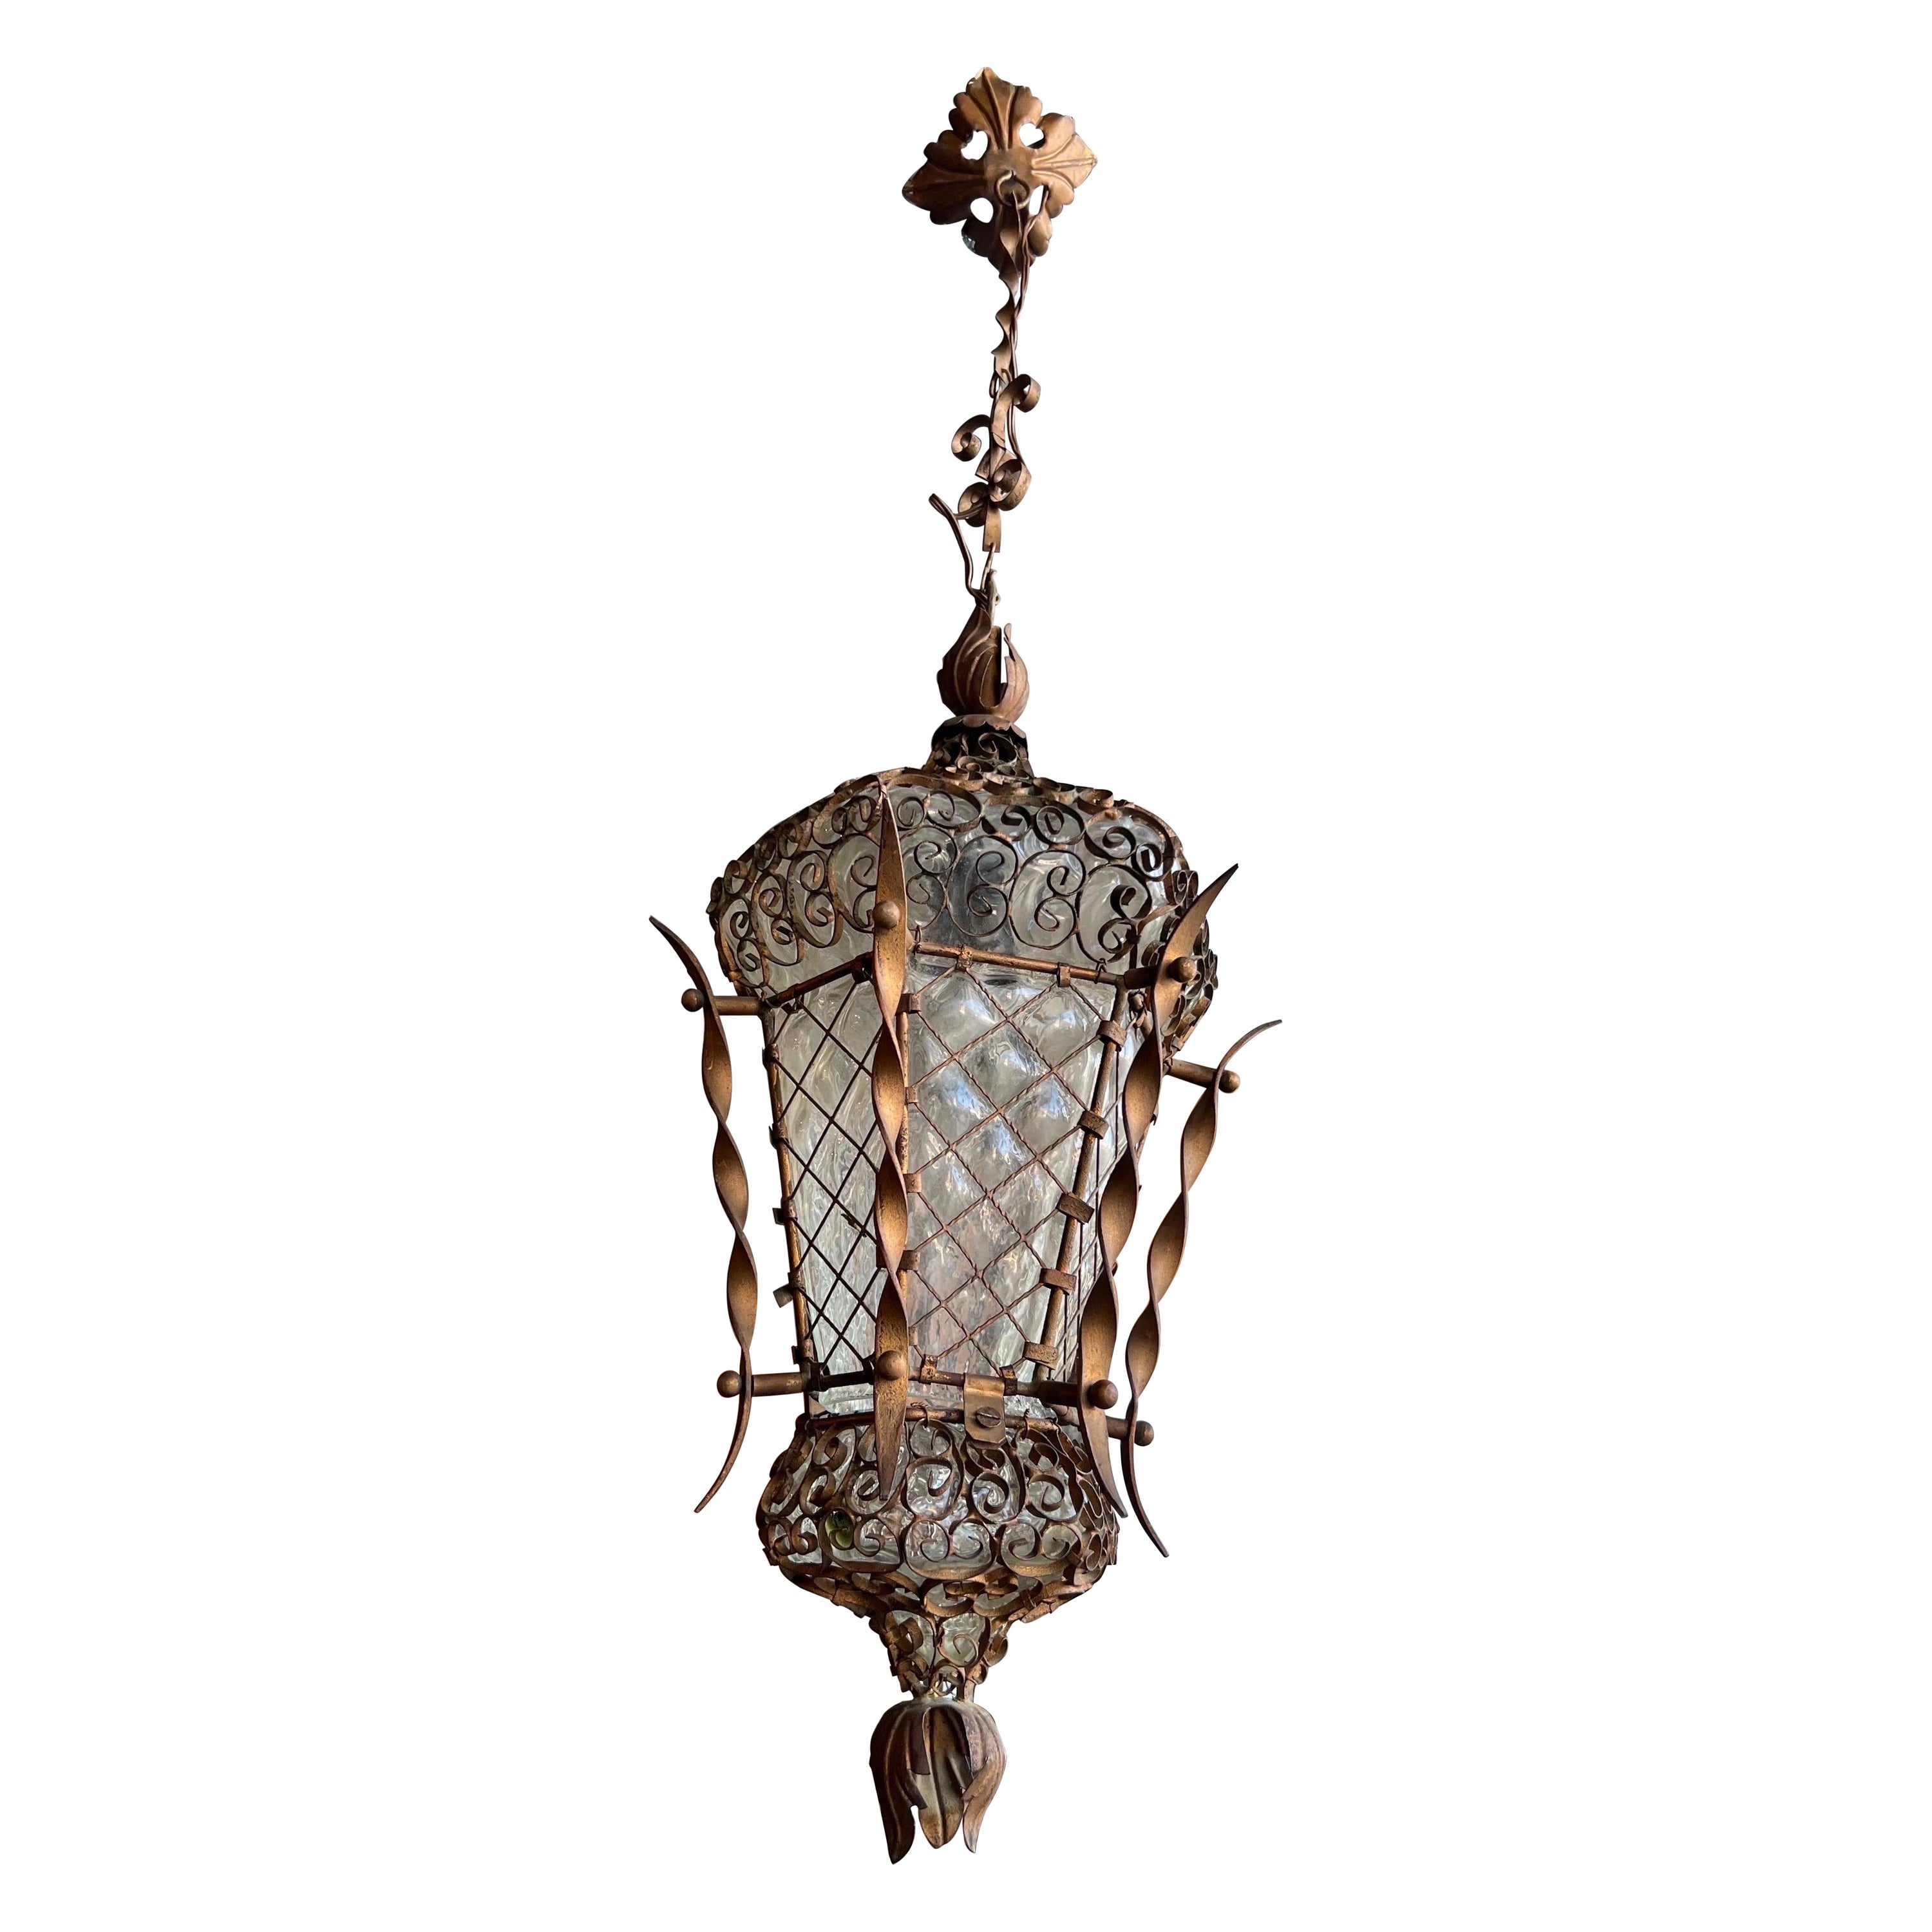 Late 19th - Early 20th Century Venetian Handblown Glass and Iron Lantern For Sale